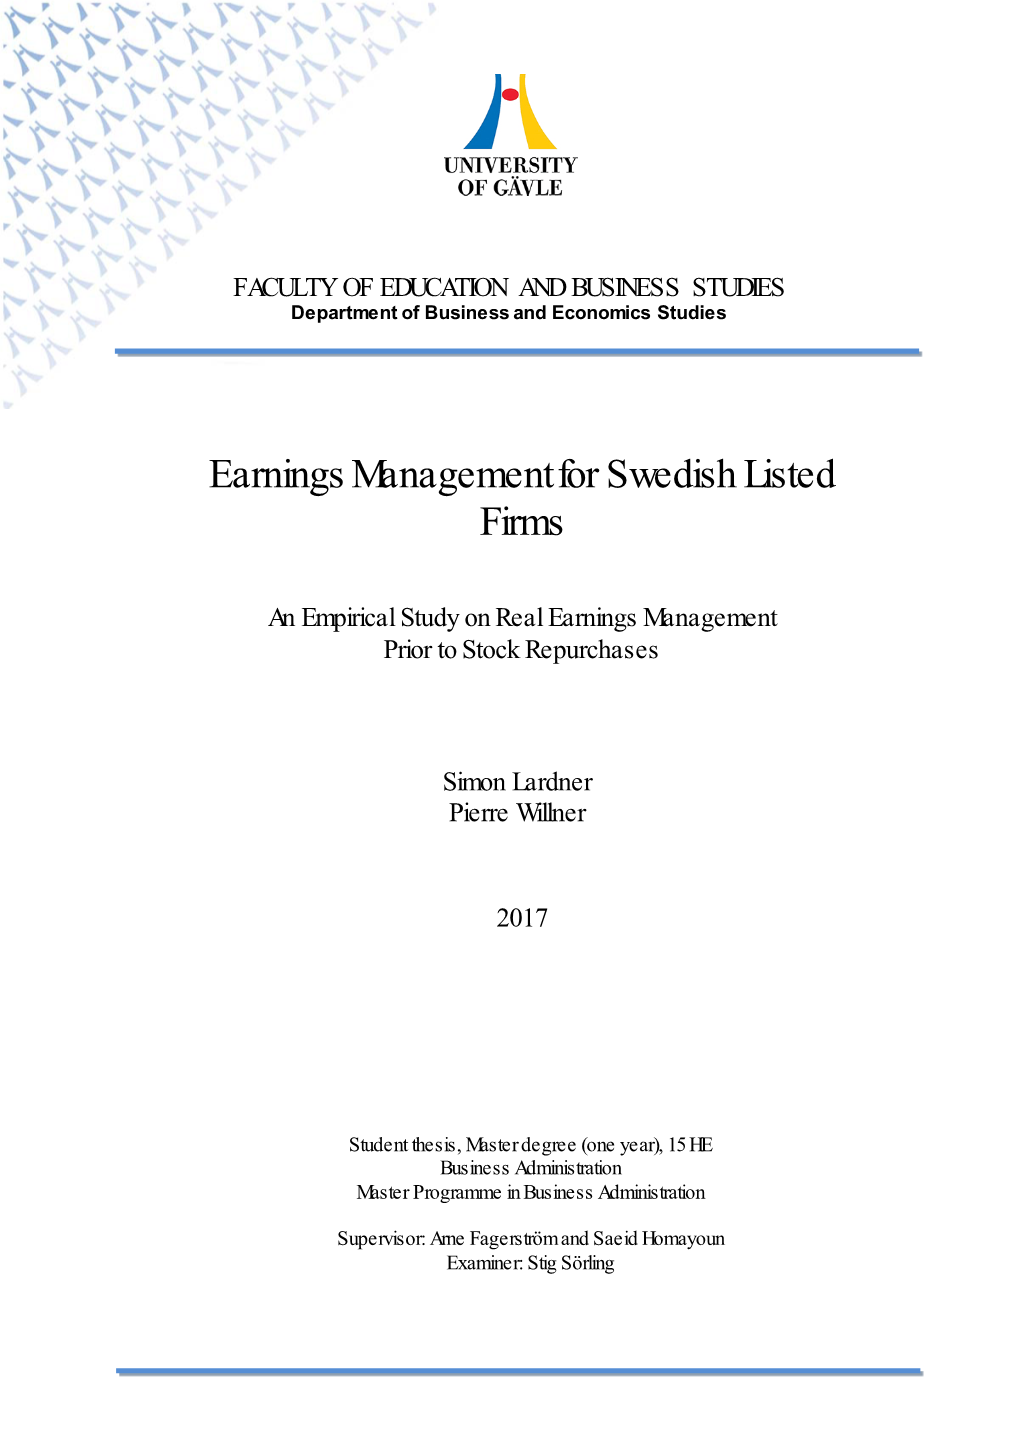 Earnings Management for Swedish Listed Firms